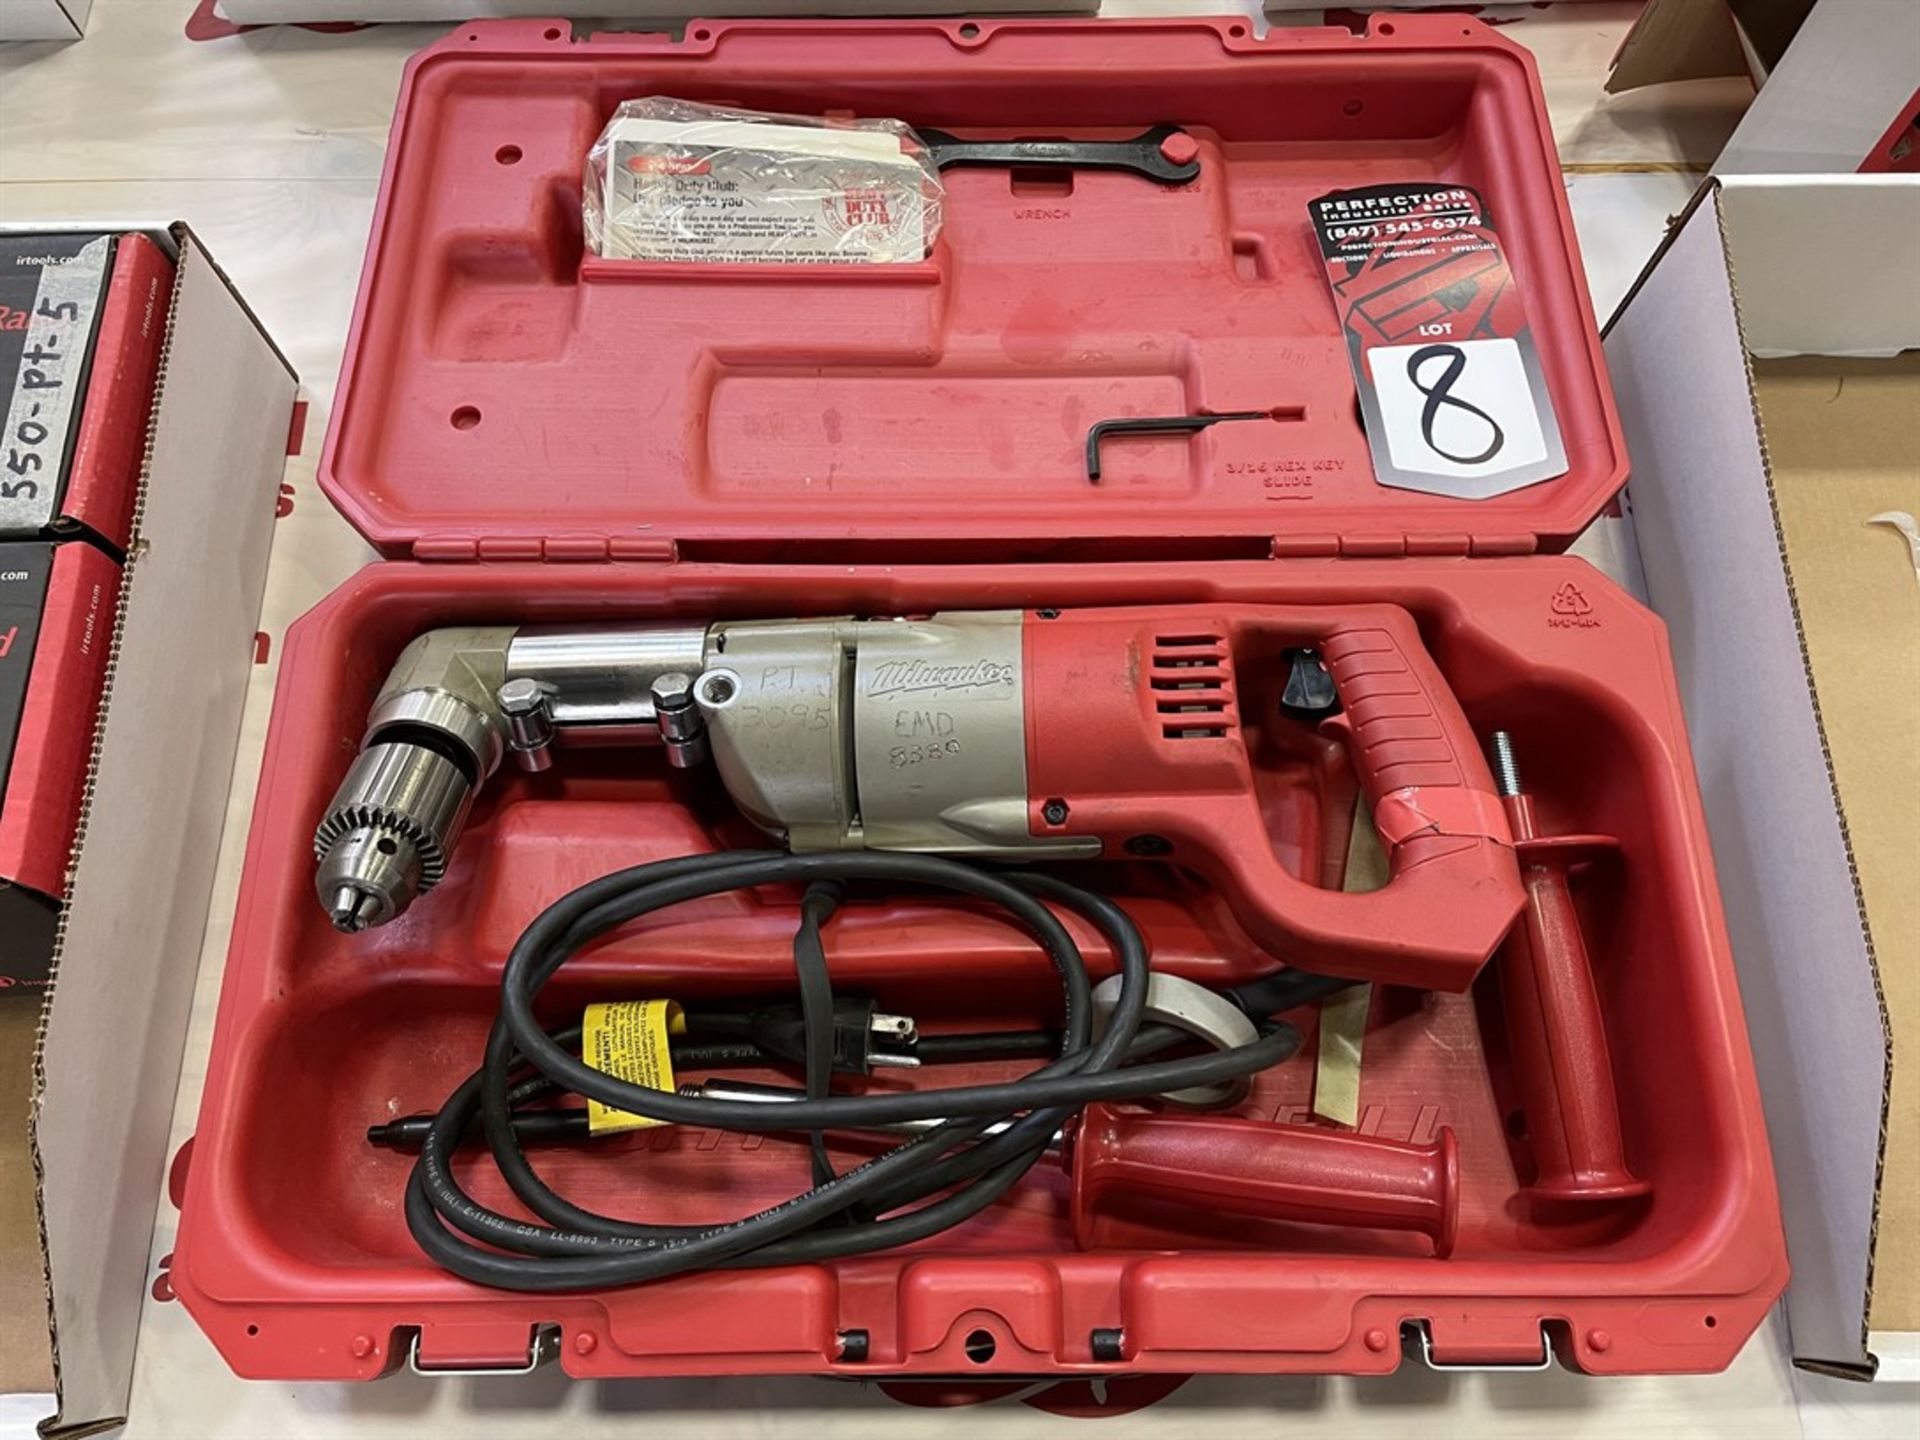 MILWAUKEE 1107-1 1/2" Right Angle Electric Drill